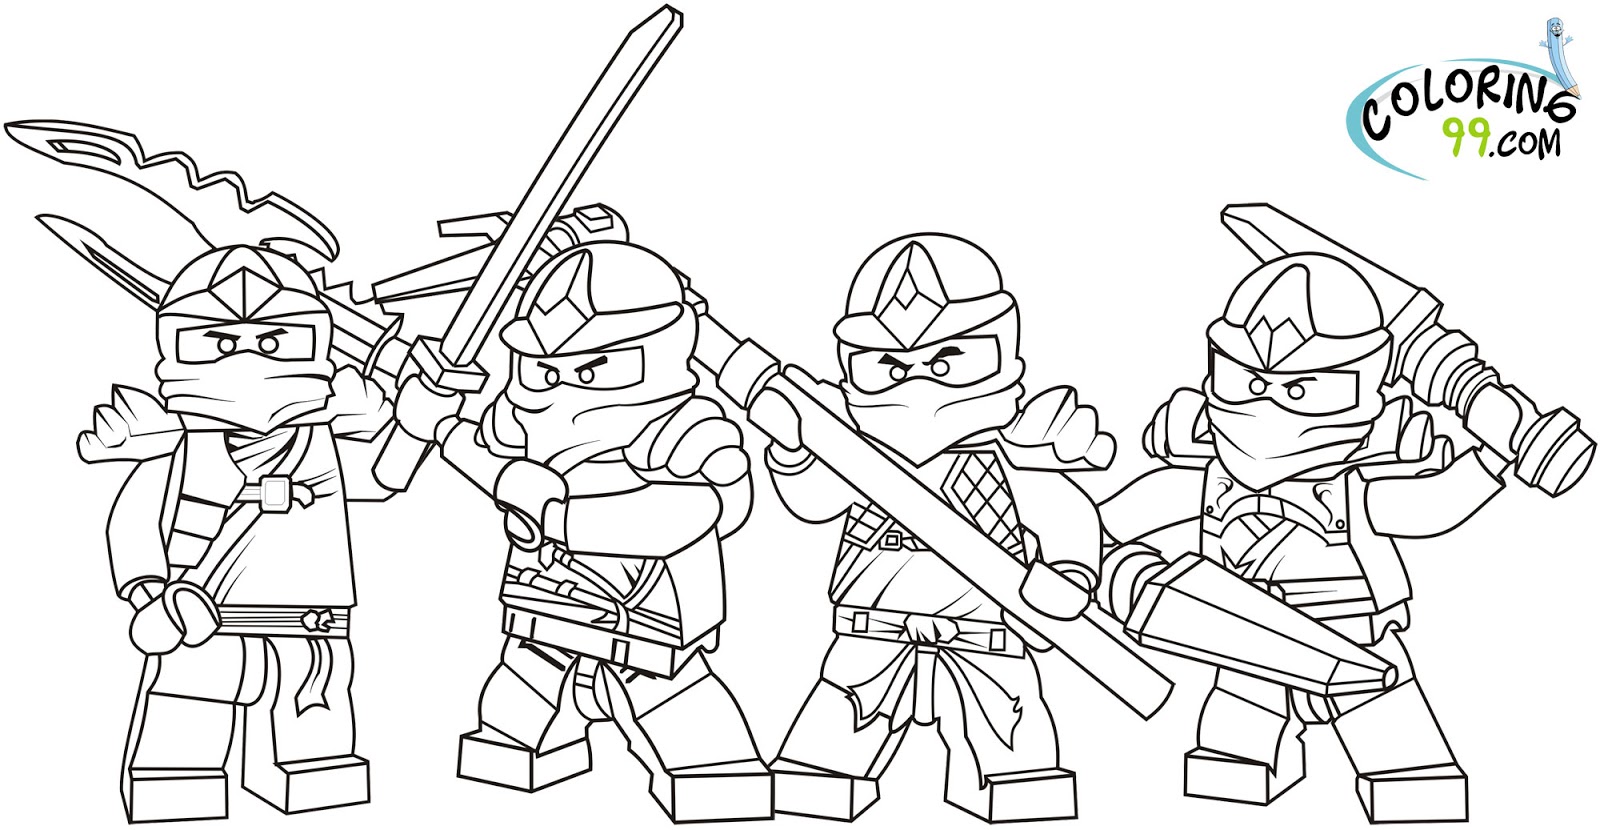 LEGO Ninjago Coloring Pages  Team colors